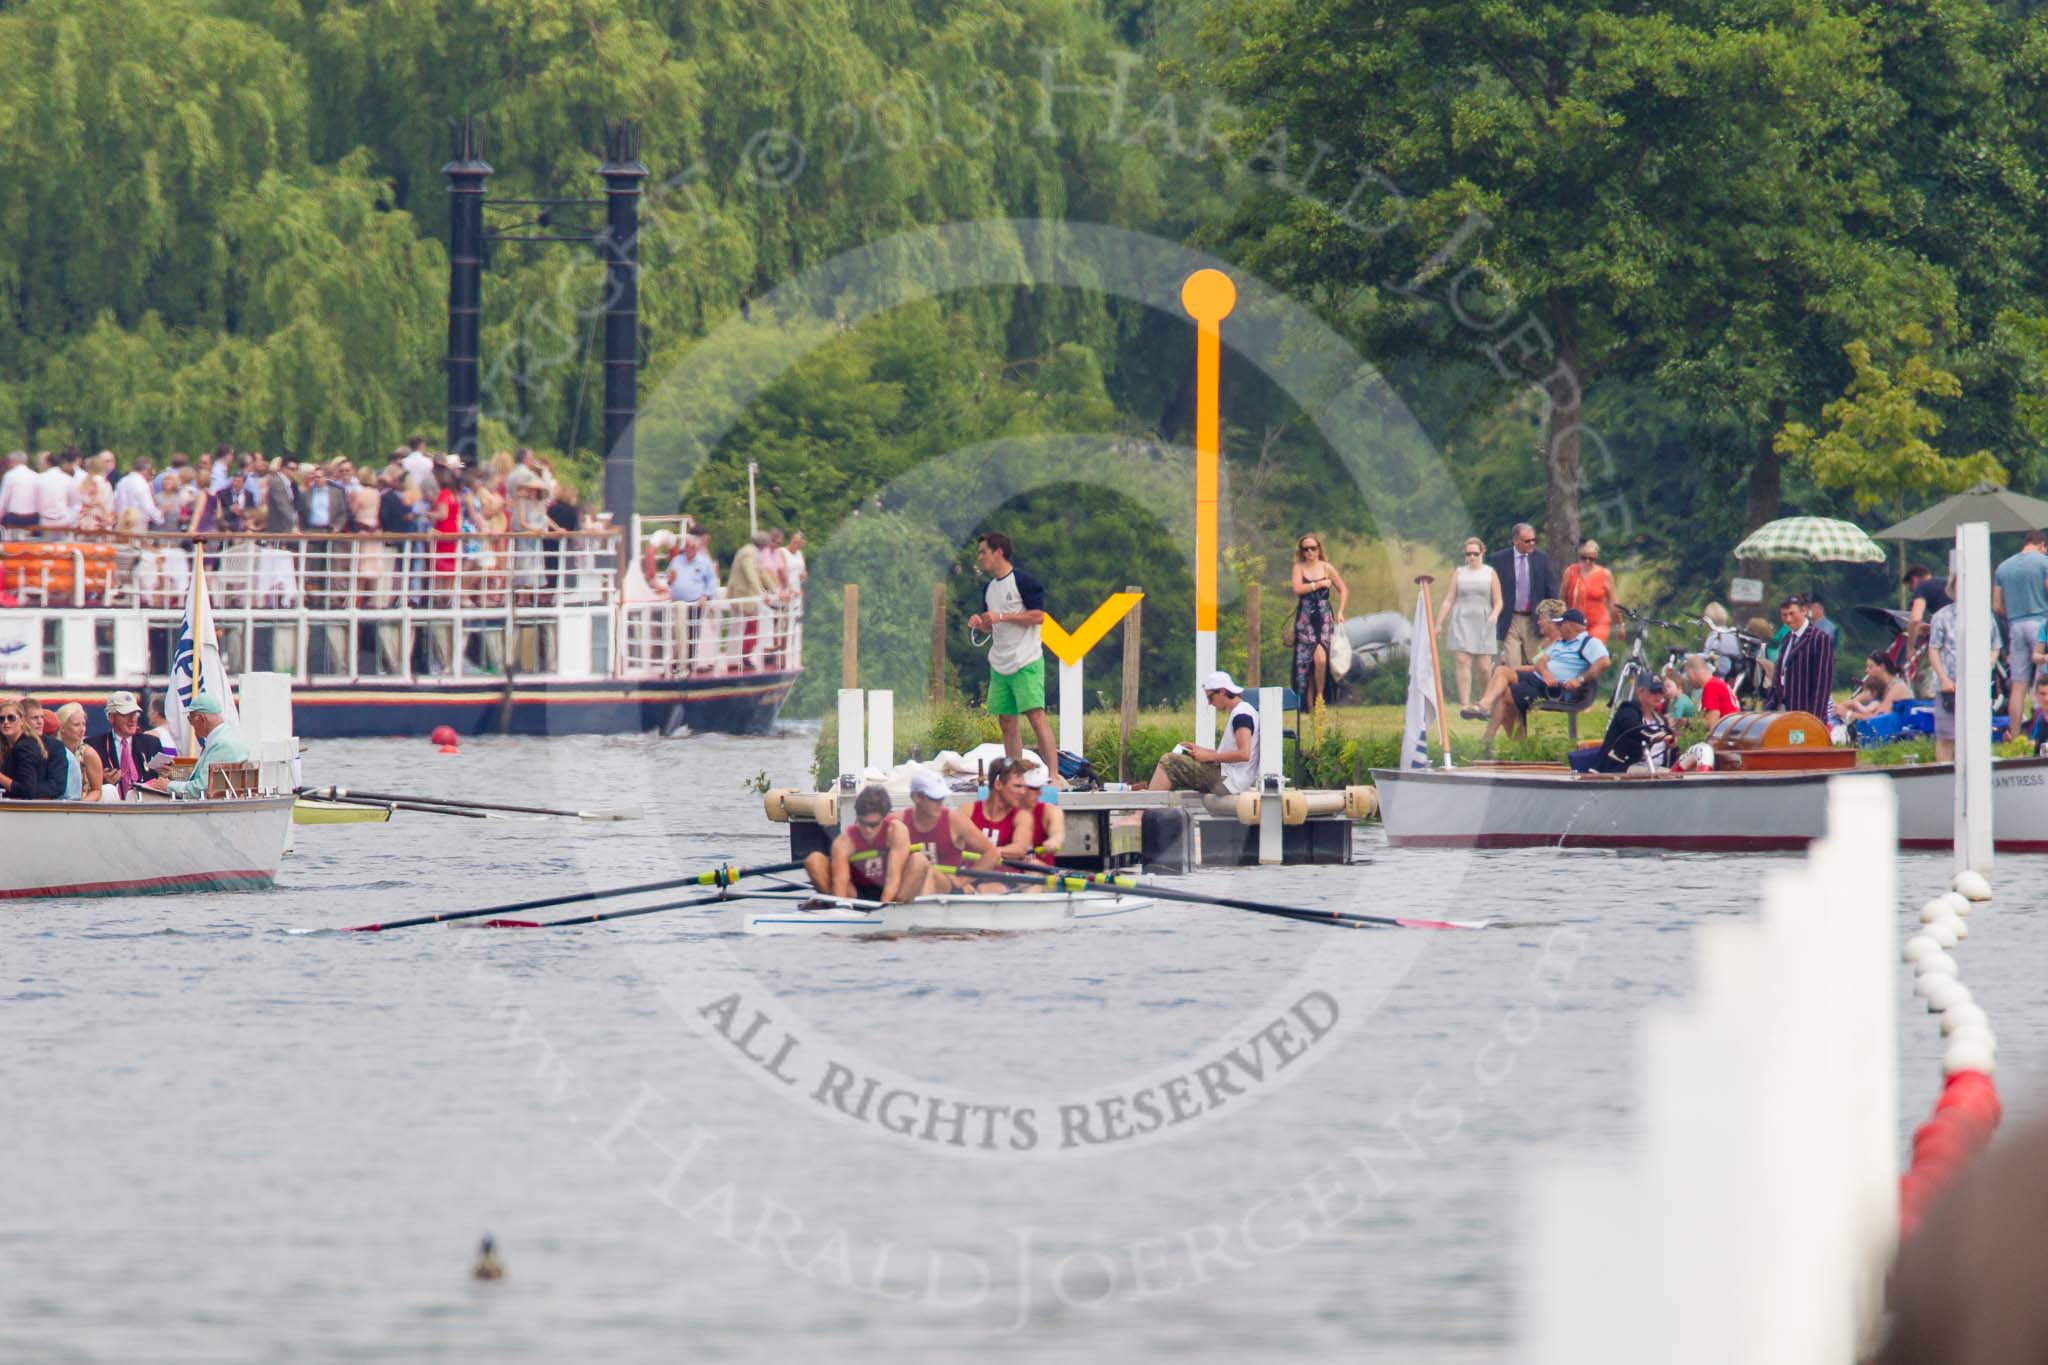 Henley Royal Regatta 2013, Saturday: Looking up to the start of the race course to the stake boats, umpire launches, and a passing paddle steamer packed with spectators. Image #296, 06 July 2013 12:21 River Thames, Henley on Thames, UK